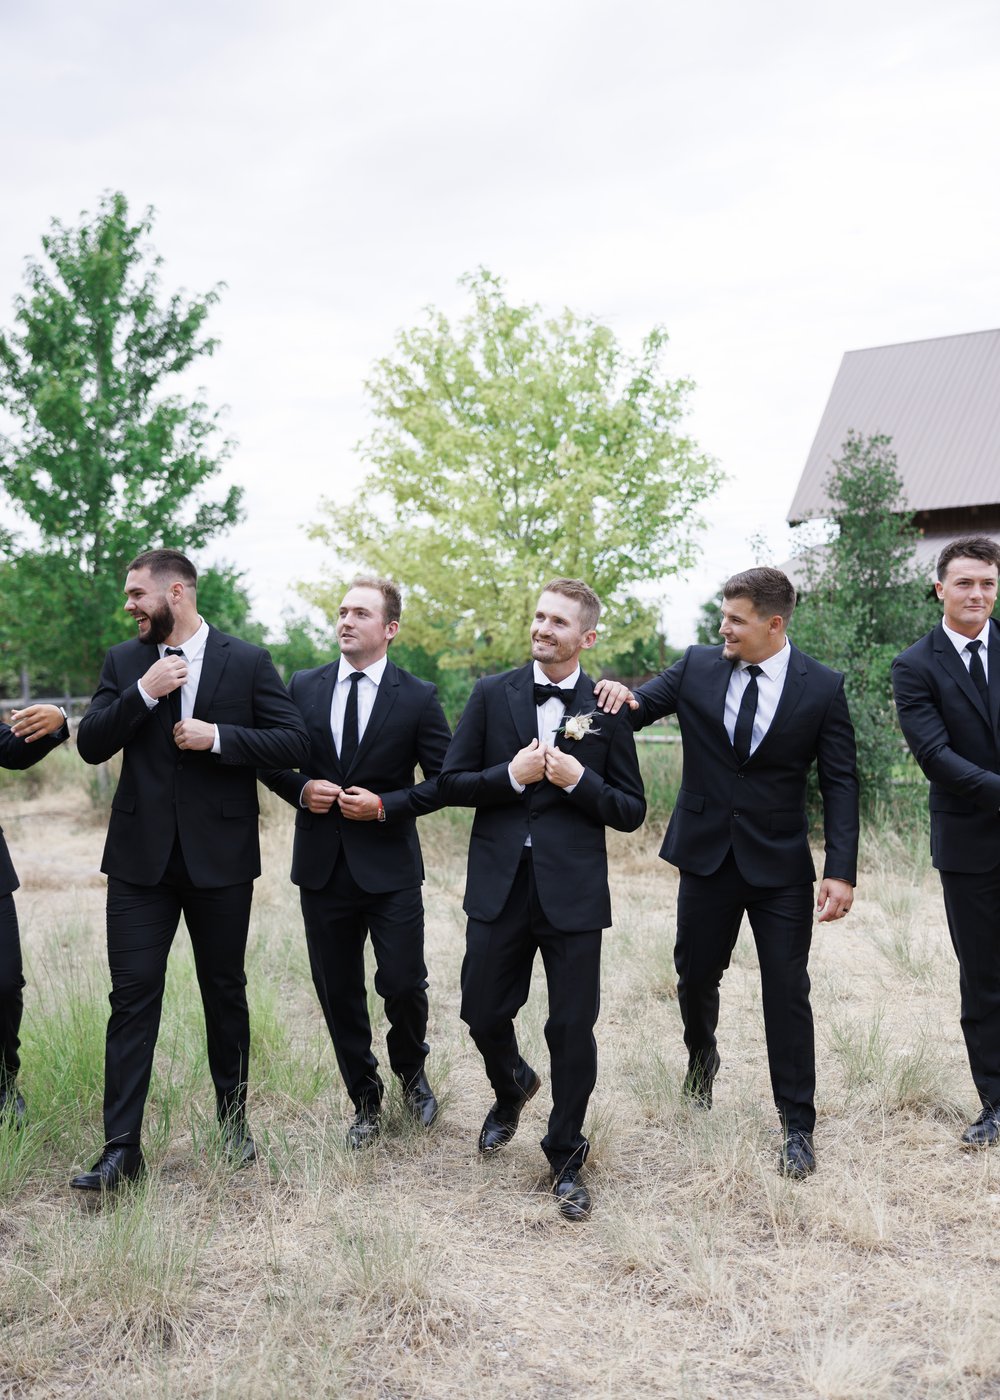  At Quiet Meadow Farms in Mapleton a group of groomsmen wearing black all laugh together by Savanna Richardson Photography. groomsmen style #SavannaRichardsonPhotography #SavannaRichardsonWeddings #QuietMeadowFarms #MapletonUTweddingphotographers 